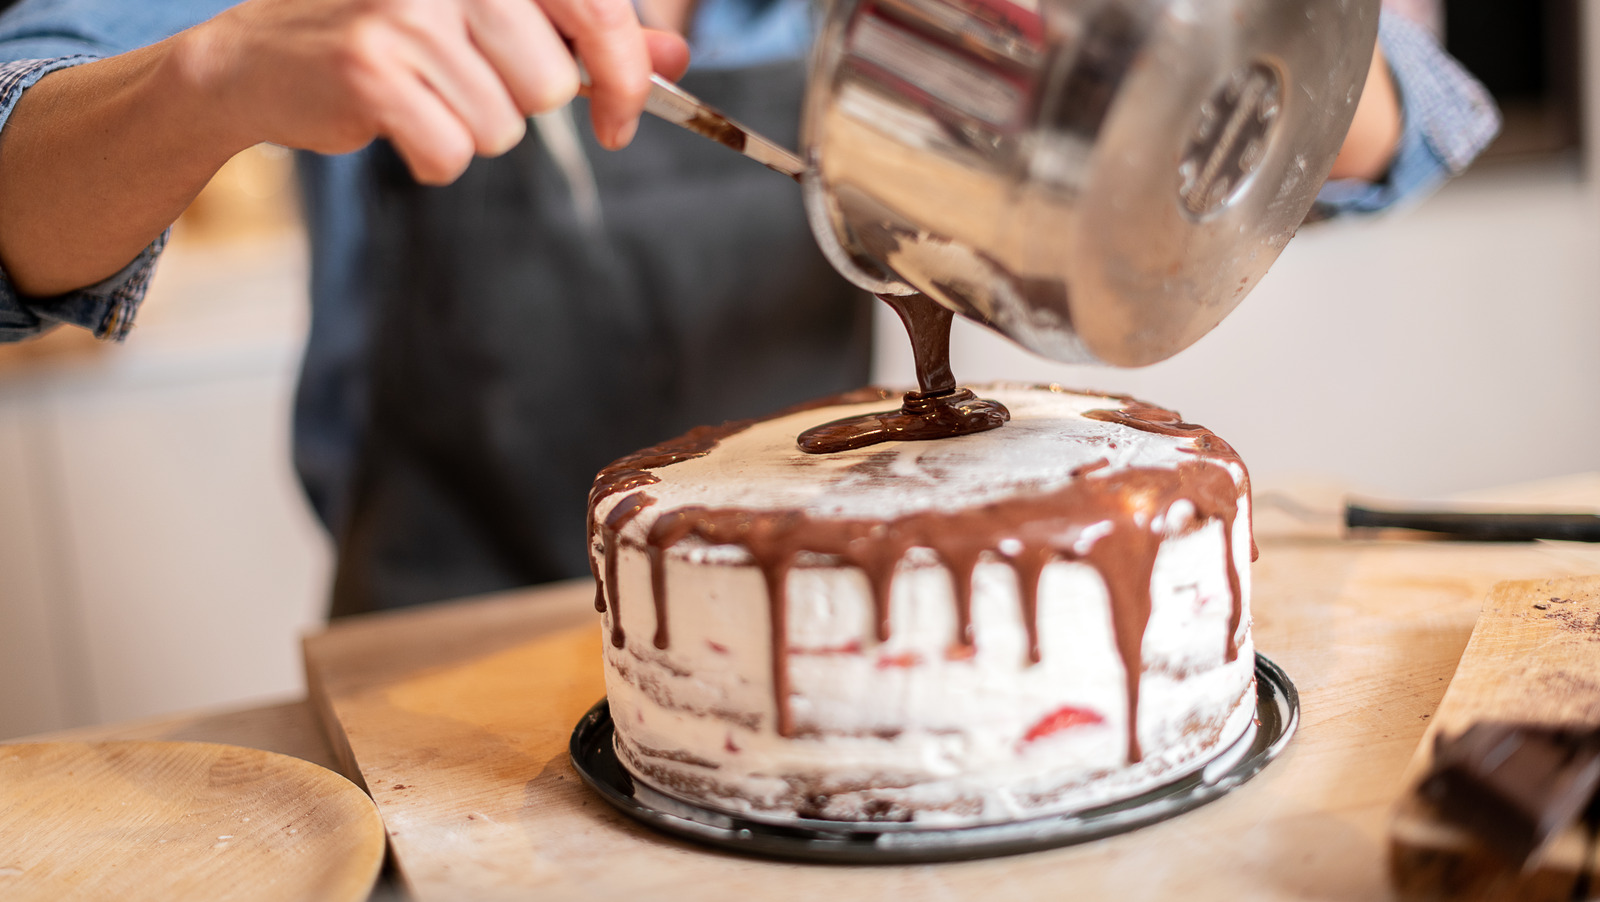 What to Do When You Break a Cake | The Kitchn